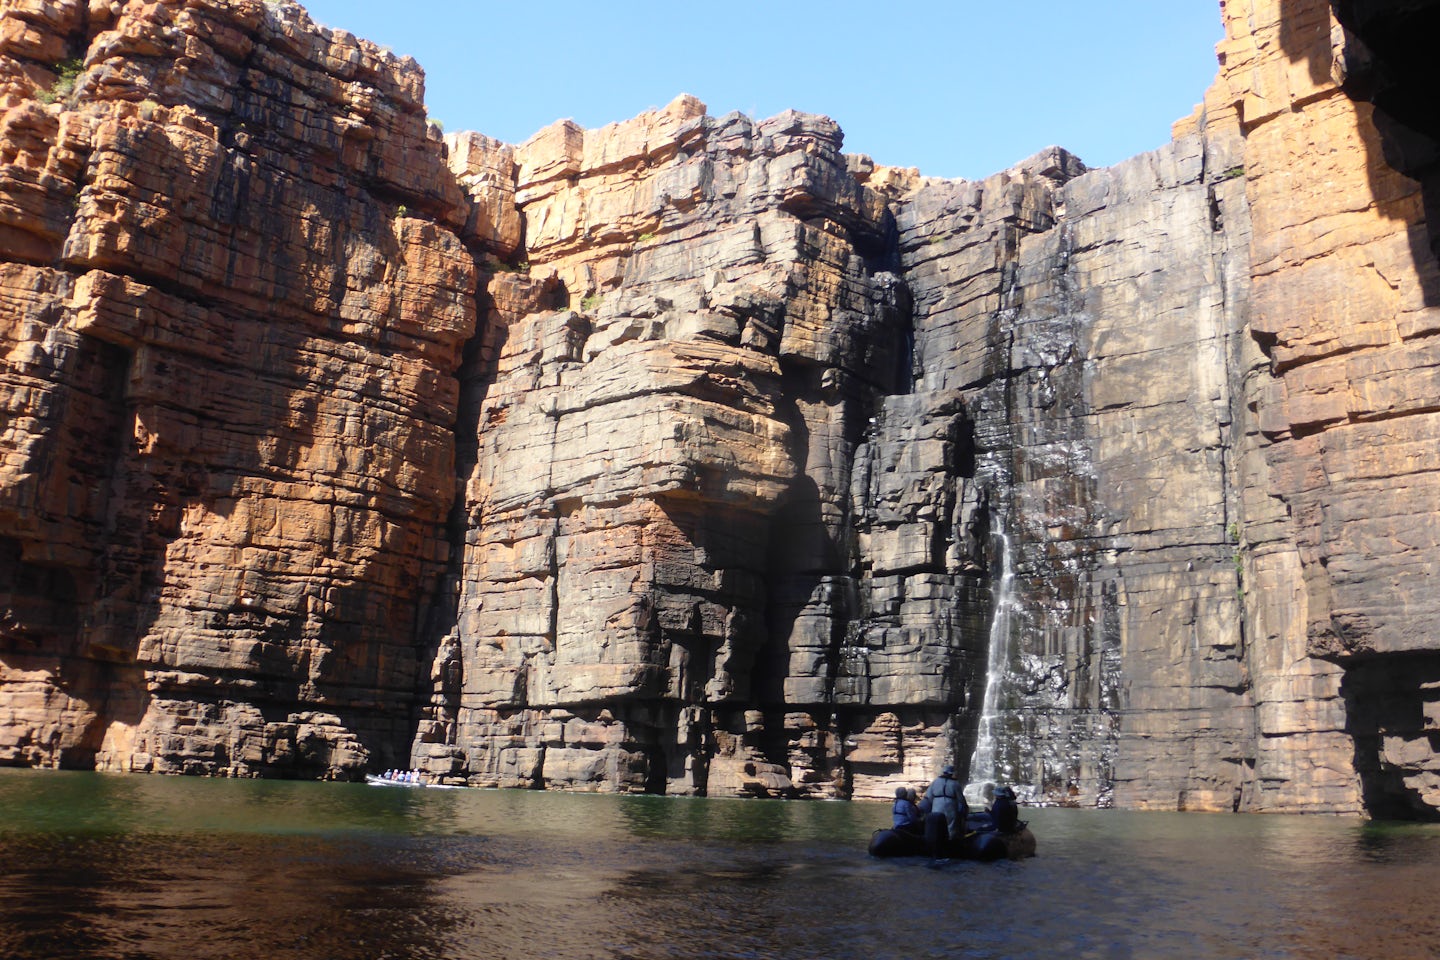 King George Falls zodiac expedition.